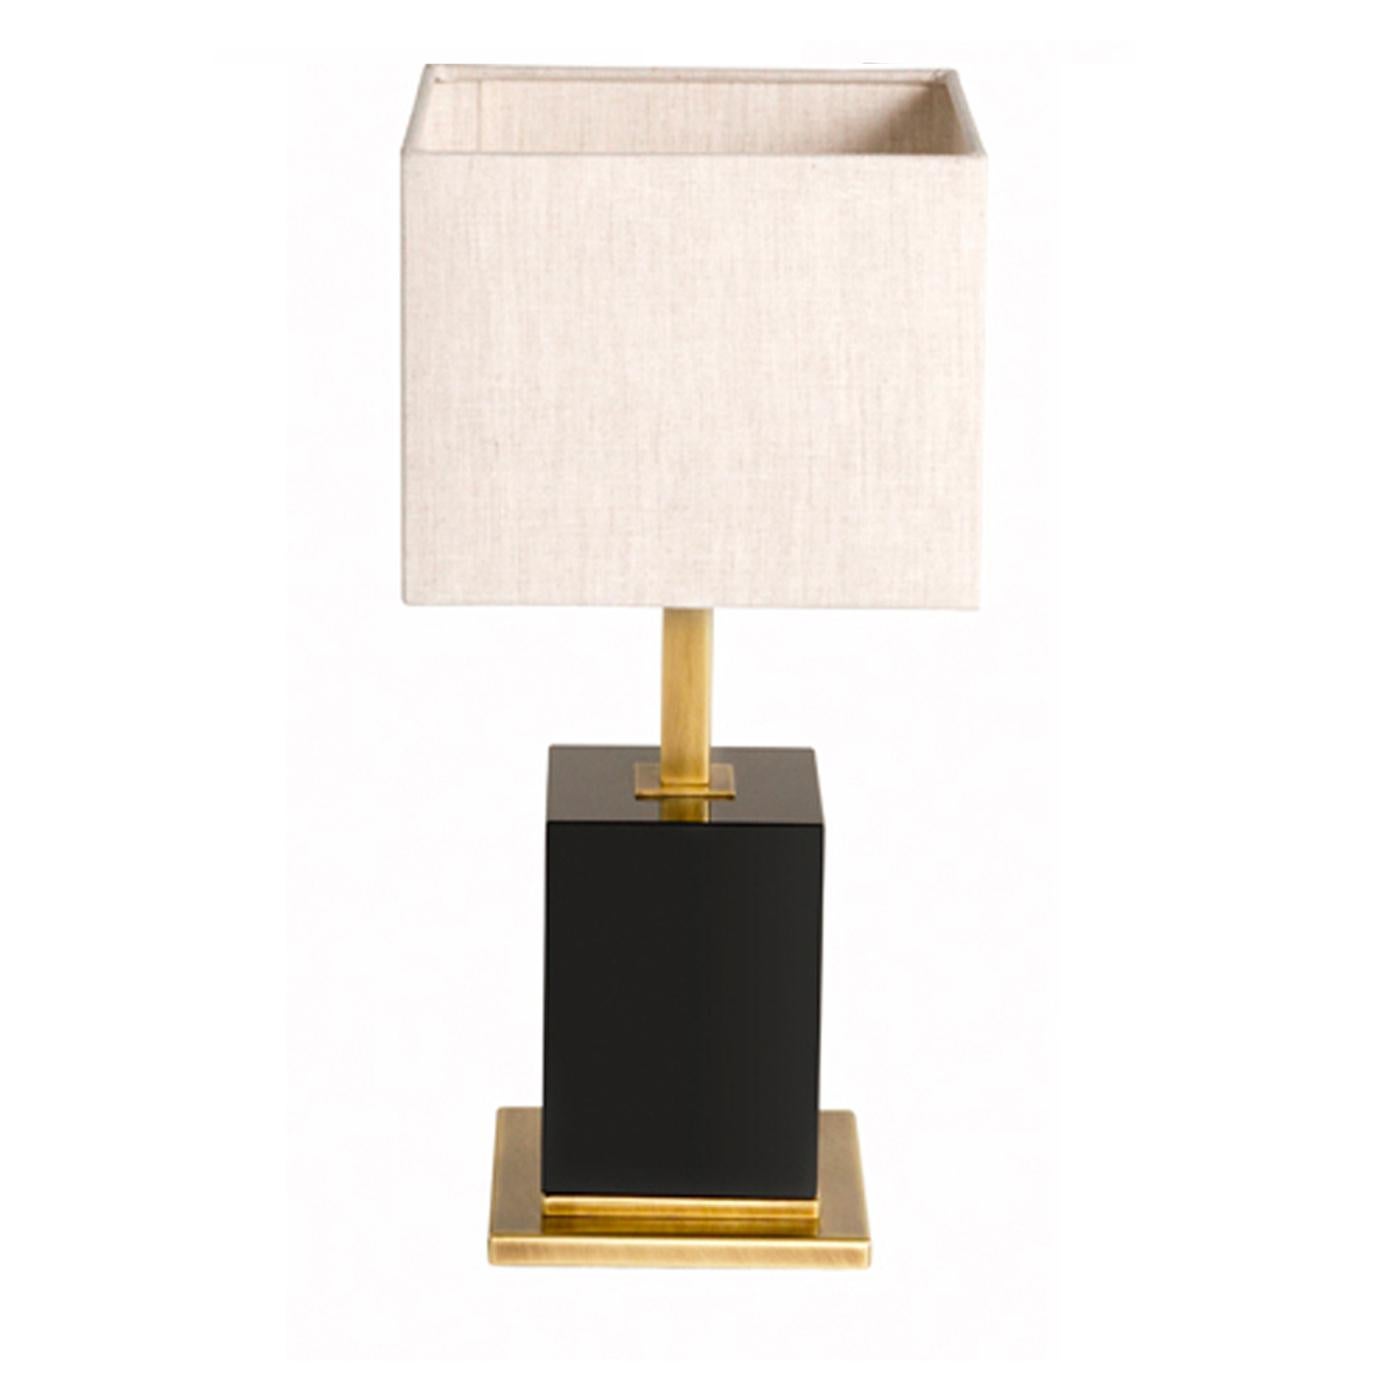 Timeless materials and a strong geometric theme characterize the Plino table lamp from a small collection of complementary styles. A seamless addition to a traditional living room, the table lamp features walnut veneer with a dark glossy finish and